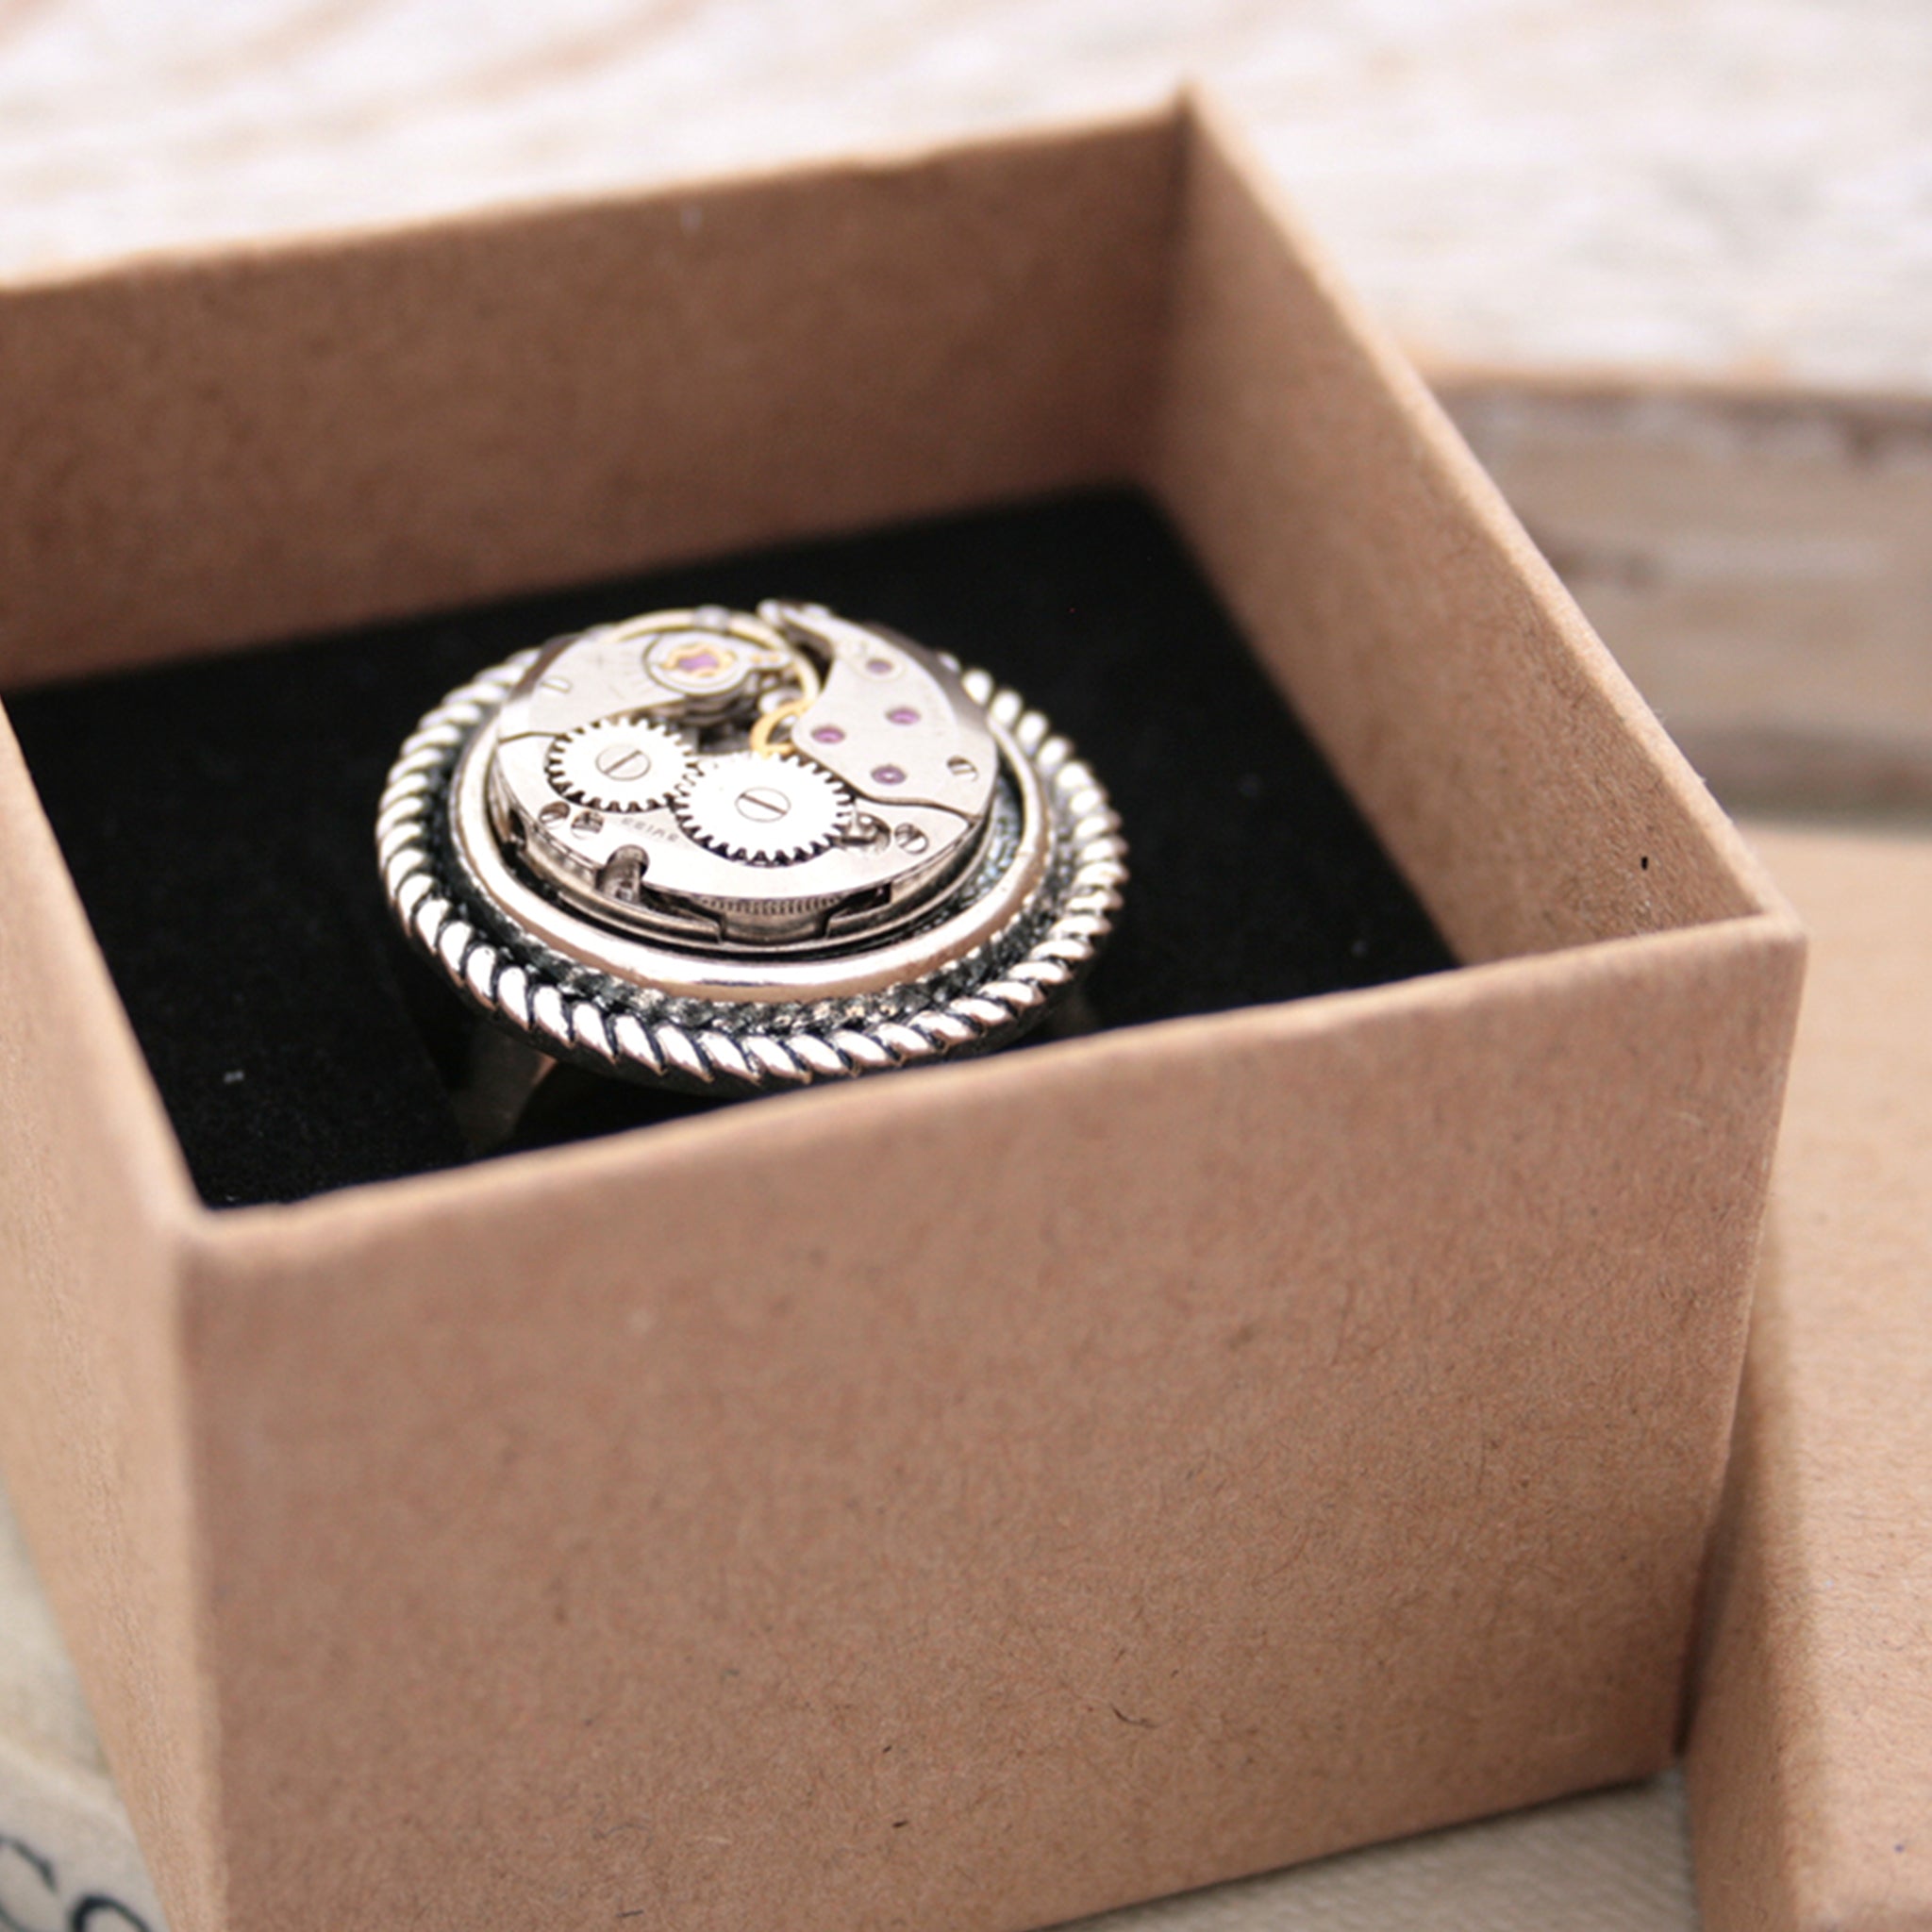 Steampunk Ring for Her made of watch work in a box